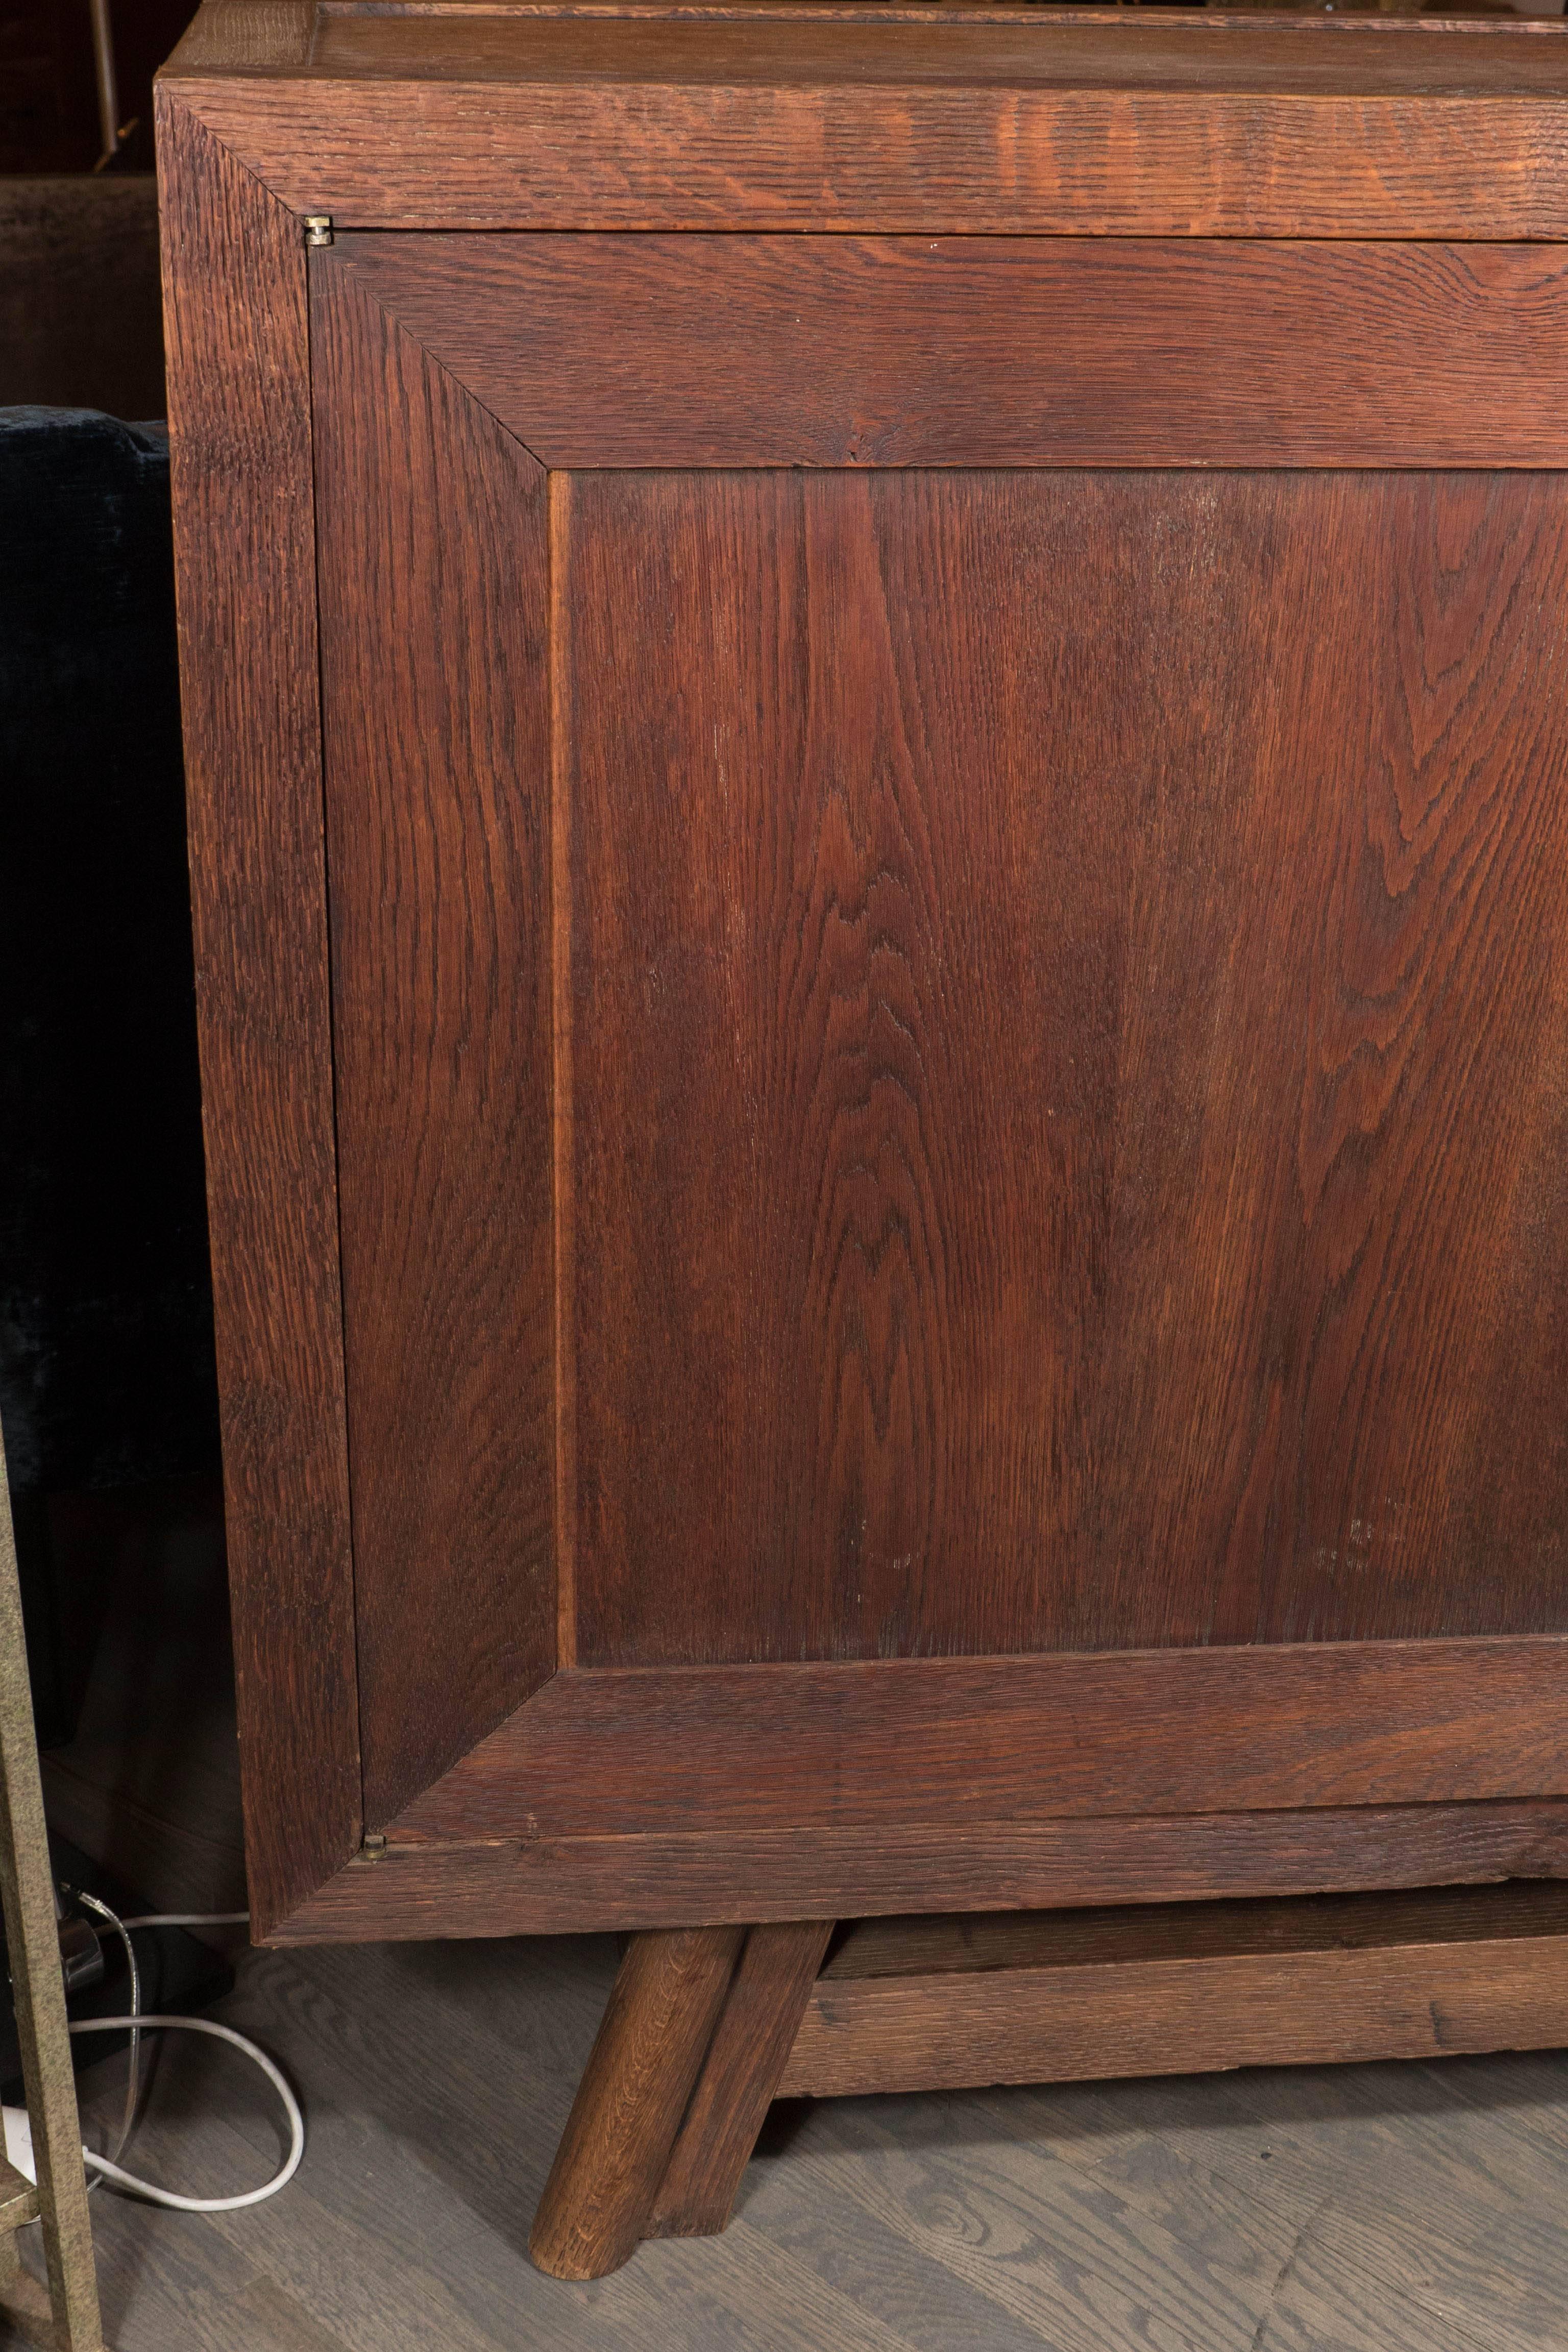 Exceptionally rare custom French Art Deco sideboard in open grain oak by Jean Dunand. Two lock-and-key doors open to reveal shelving as well as a single-pull drawer. Very solid construction and minimal deco design really highlight the wonderful open